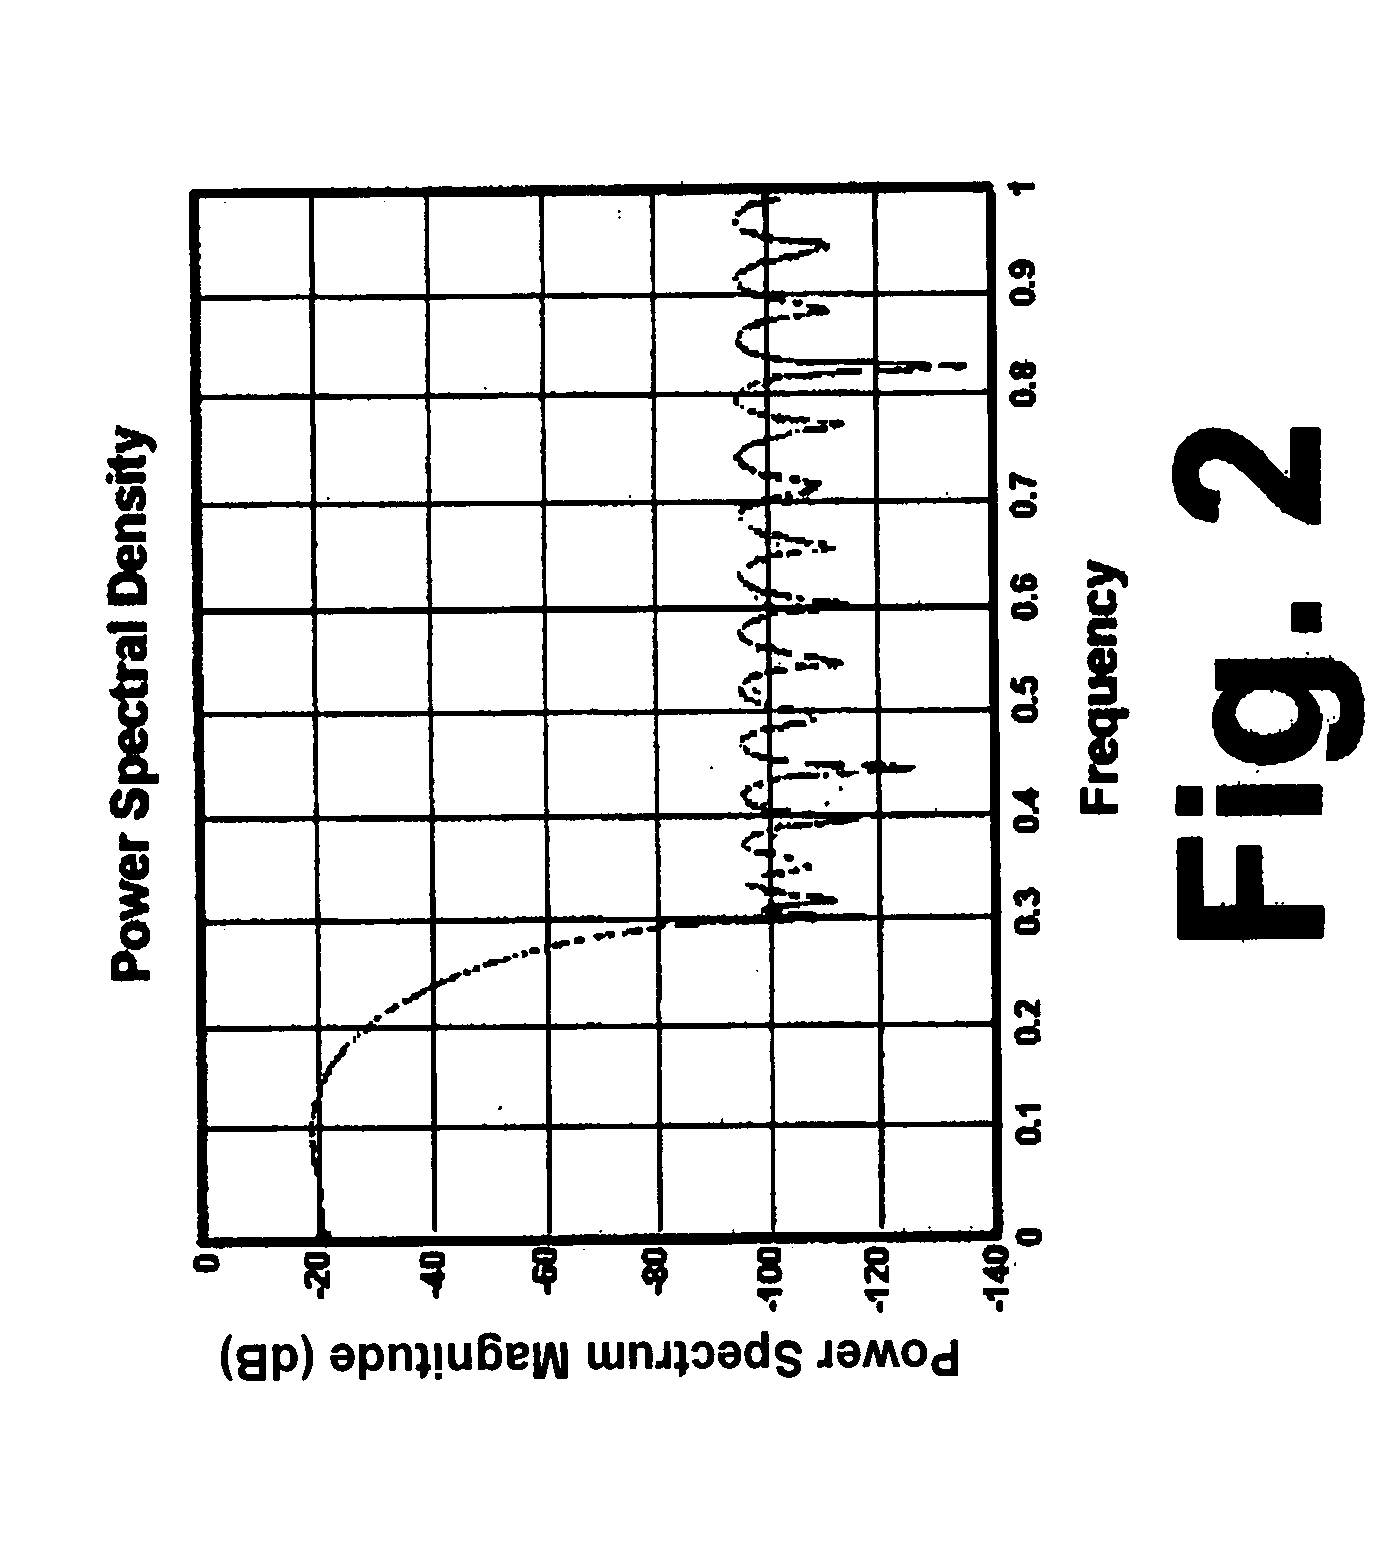 Method and apparatus for enhanced convergence of the normalized LMS algorithm